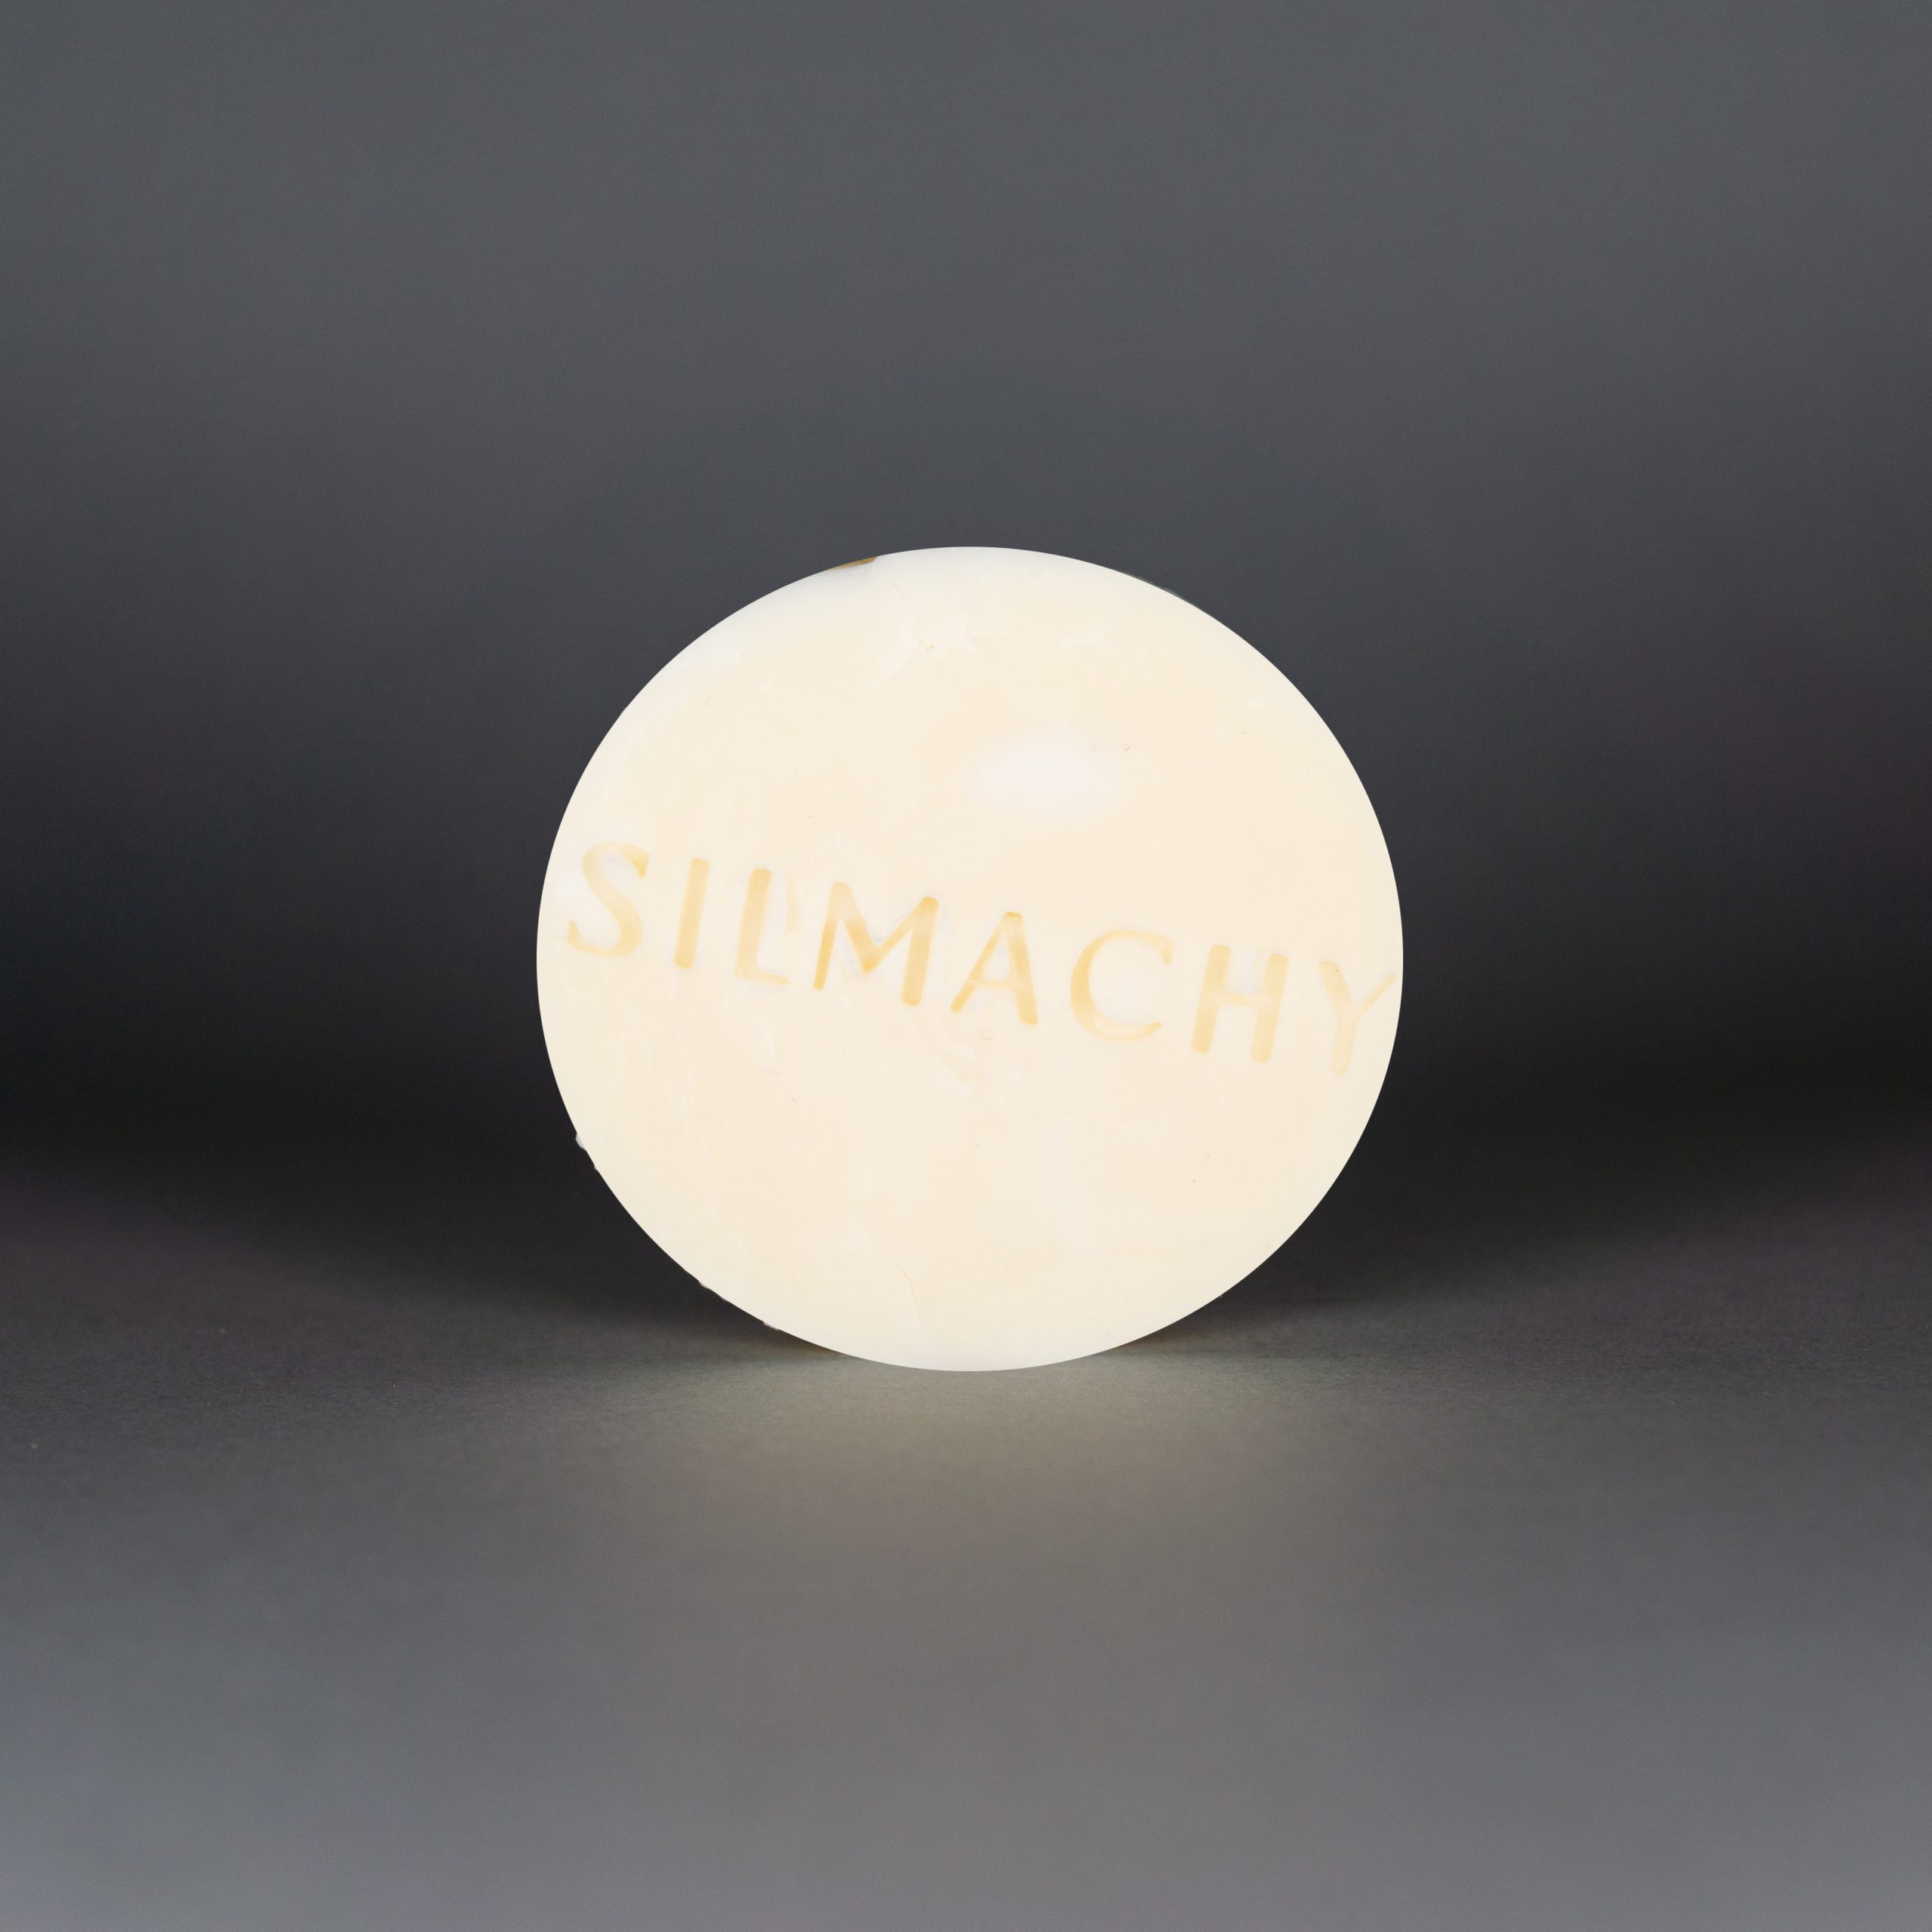 Shampoo bar with hops extract - Silmachy cosmetics